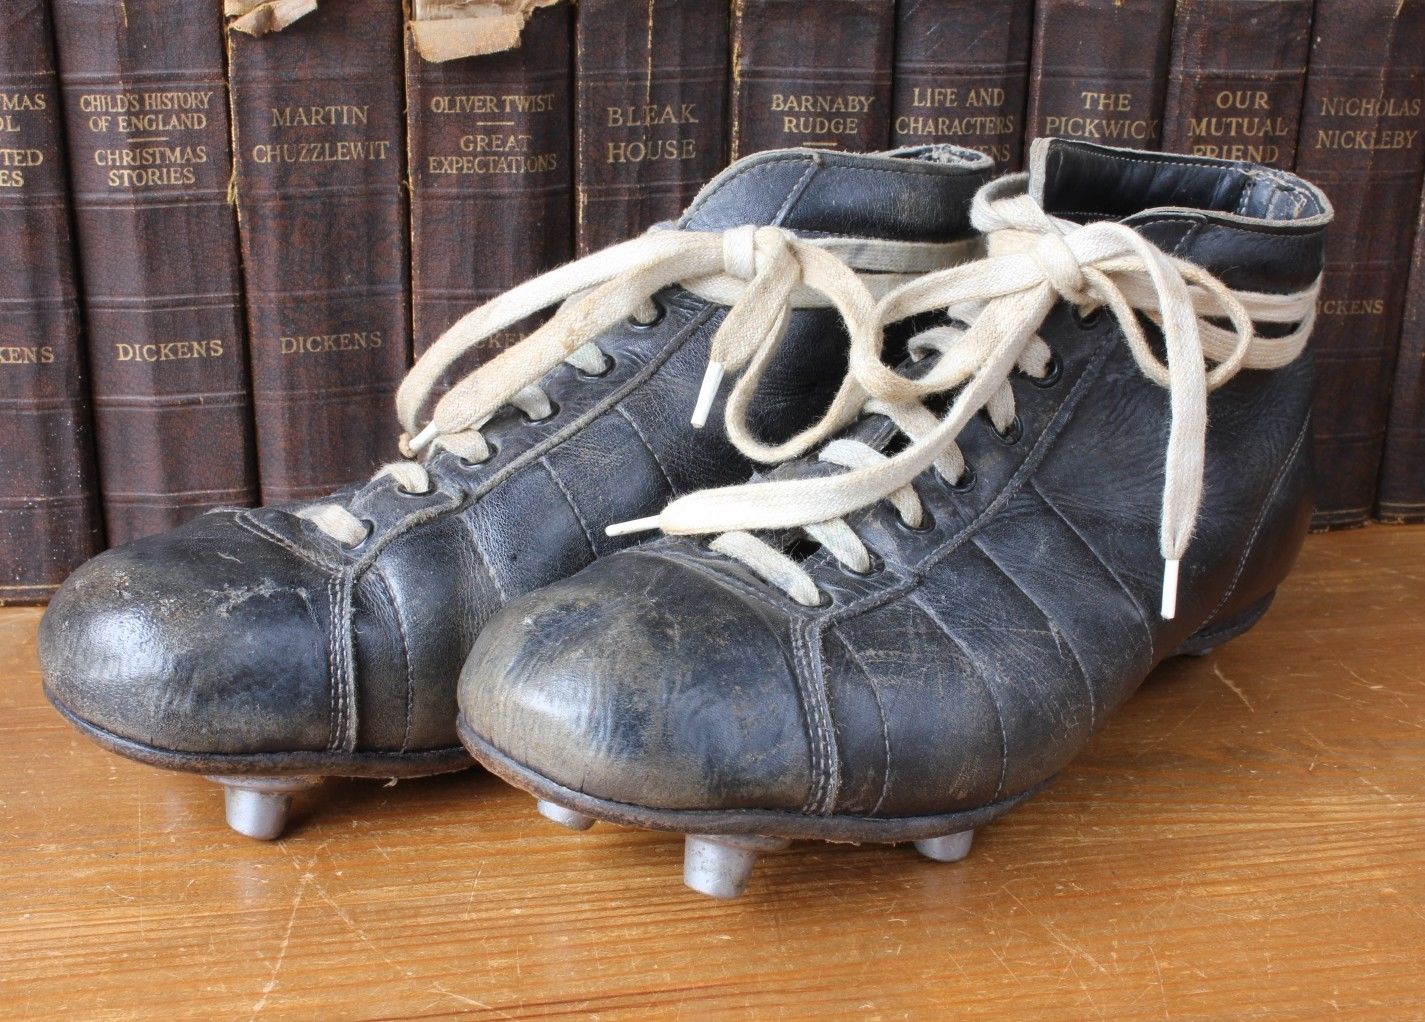 Vintage Rugby Boots. Old Black Leather Metal Stud Cleats.